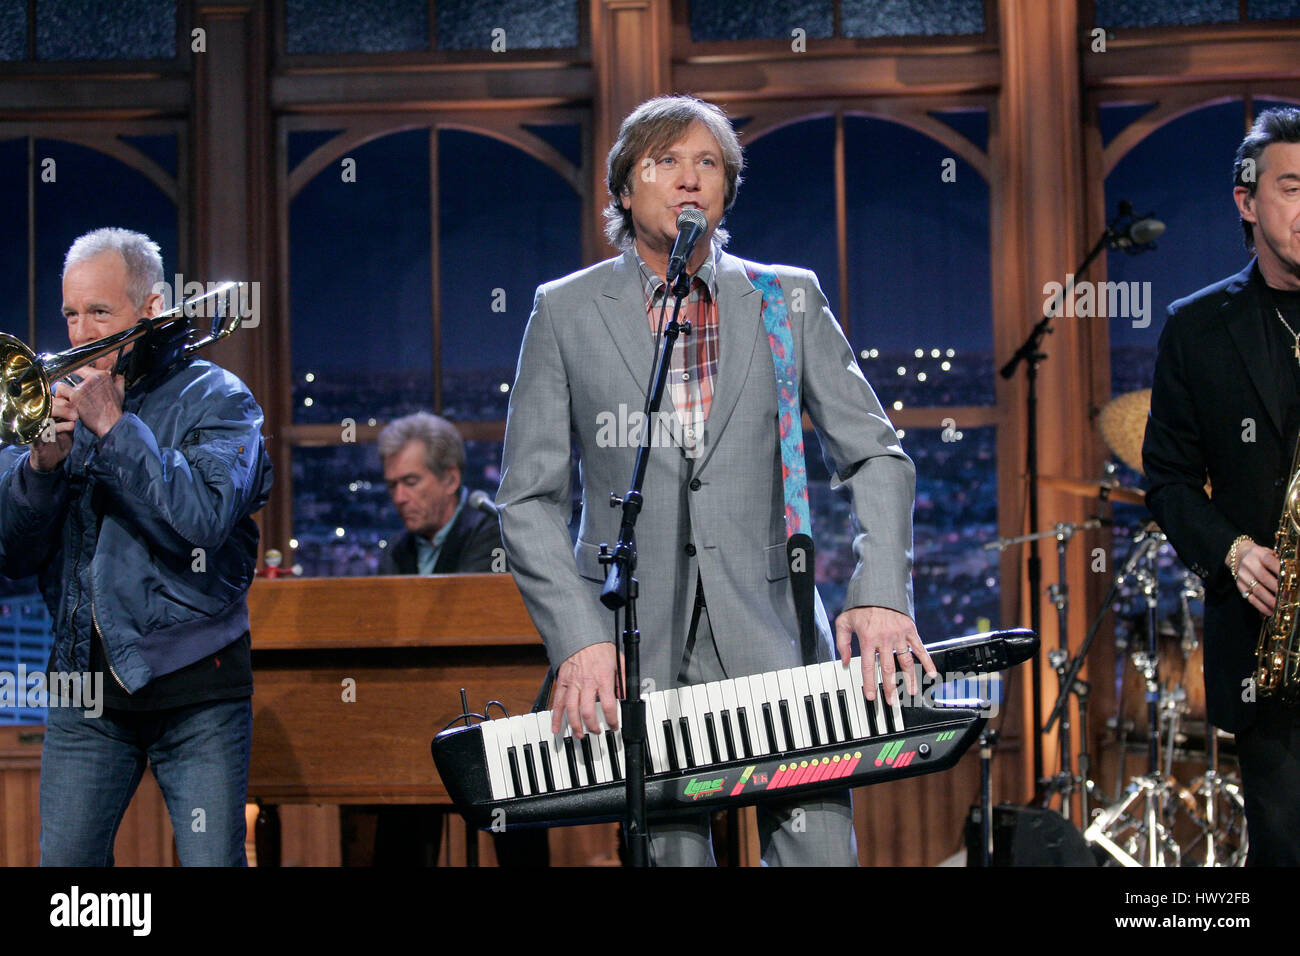 The band, Chicago, with member Robert Lamm on lead vocals and keyboard, perform during a segment of 'The Late Late Show with Craig Ferguson' at CBS Television City in Los Angeles, California, on March 9, 2009. Photo by Francis Specker Stock Photo